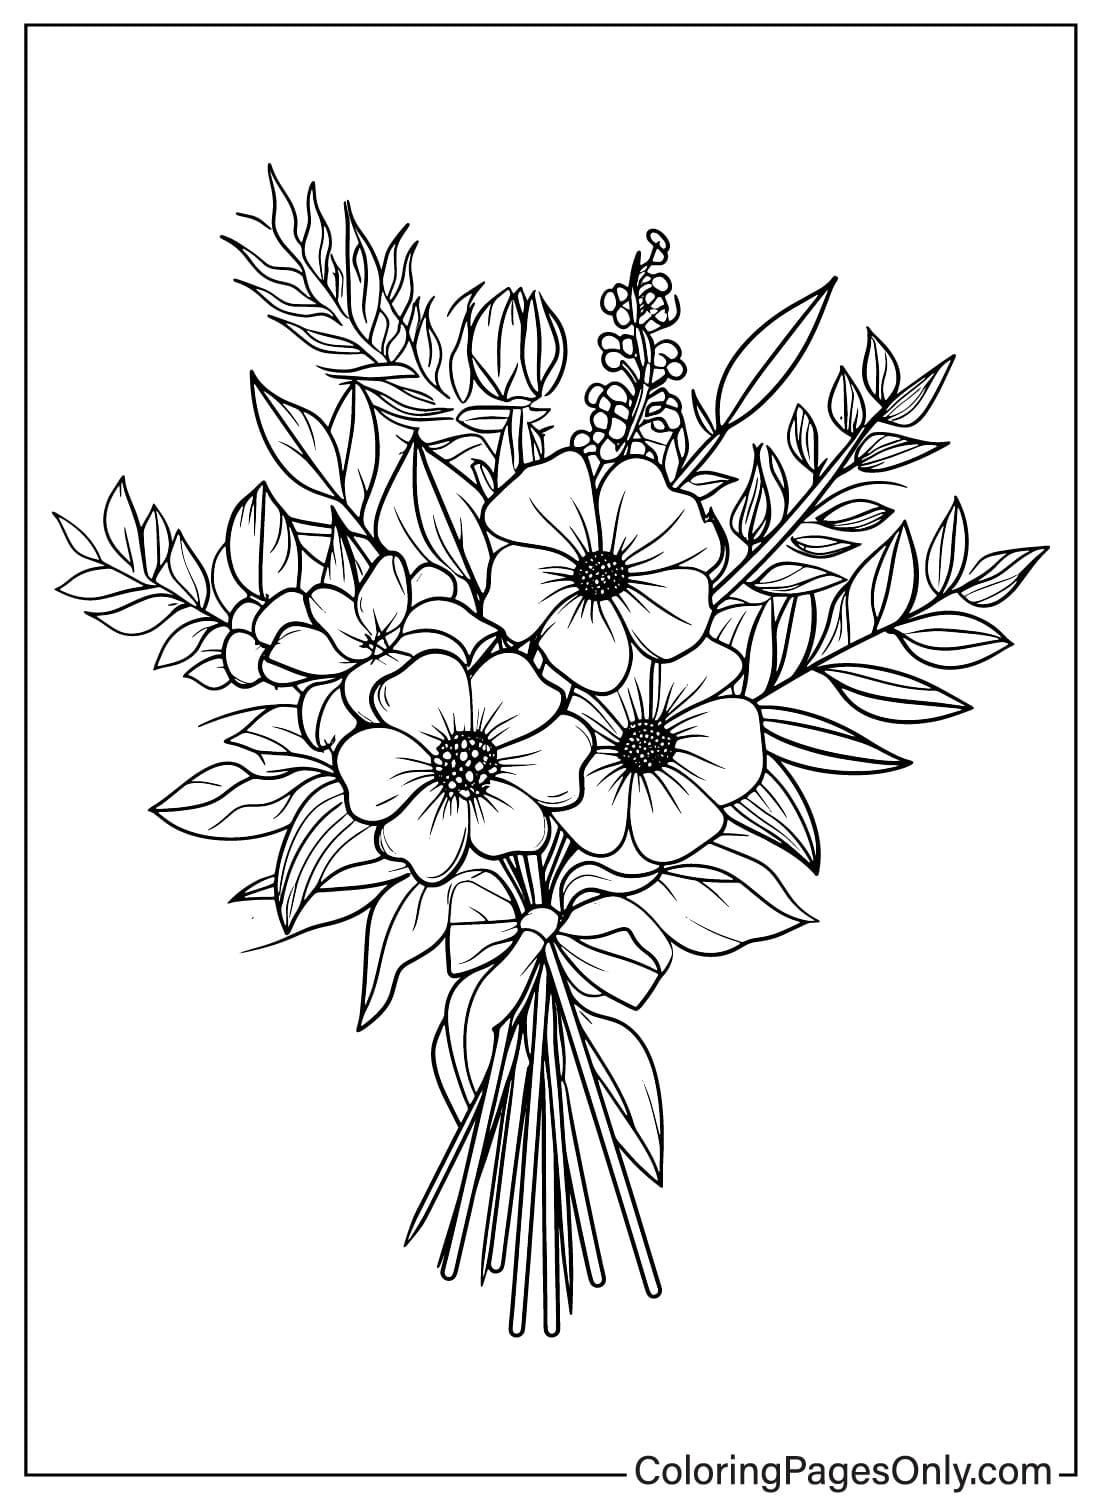 Flower Bouquet Coloring Sheet for Kids from Flower Bouquet